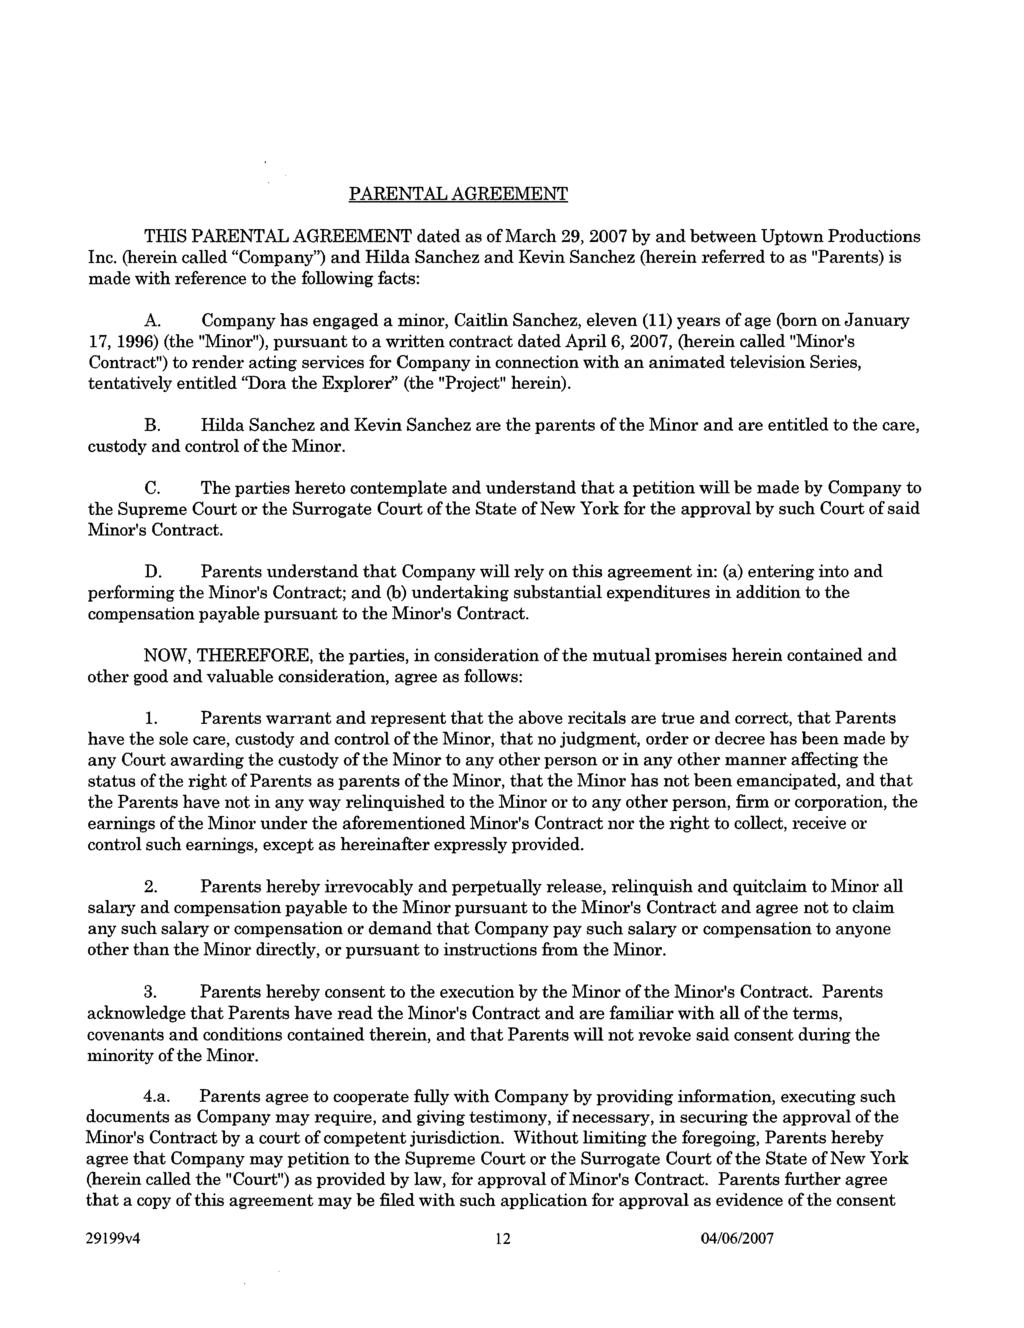 PARENTAL AGREEMENT THIS PARENTAL AGREEMENT dated as of March 29,2007 by and between Uptown Productions Inc.